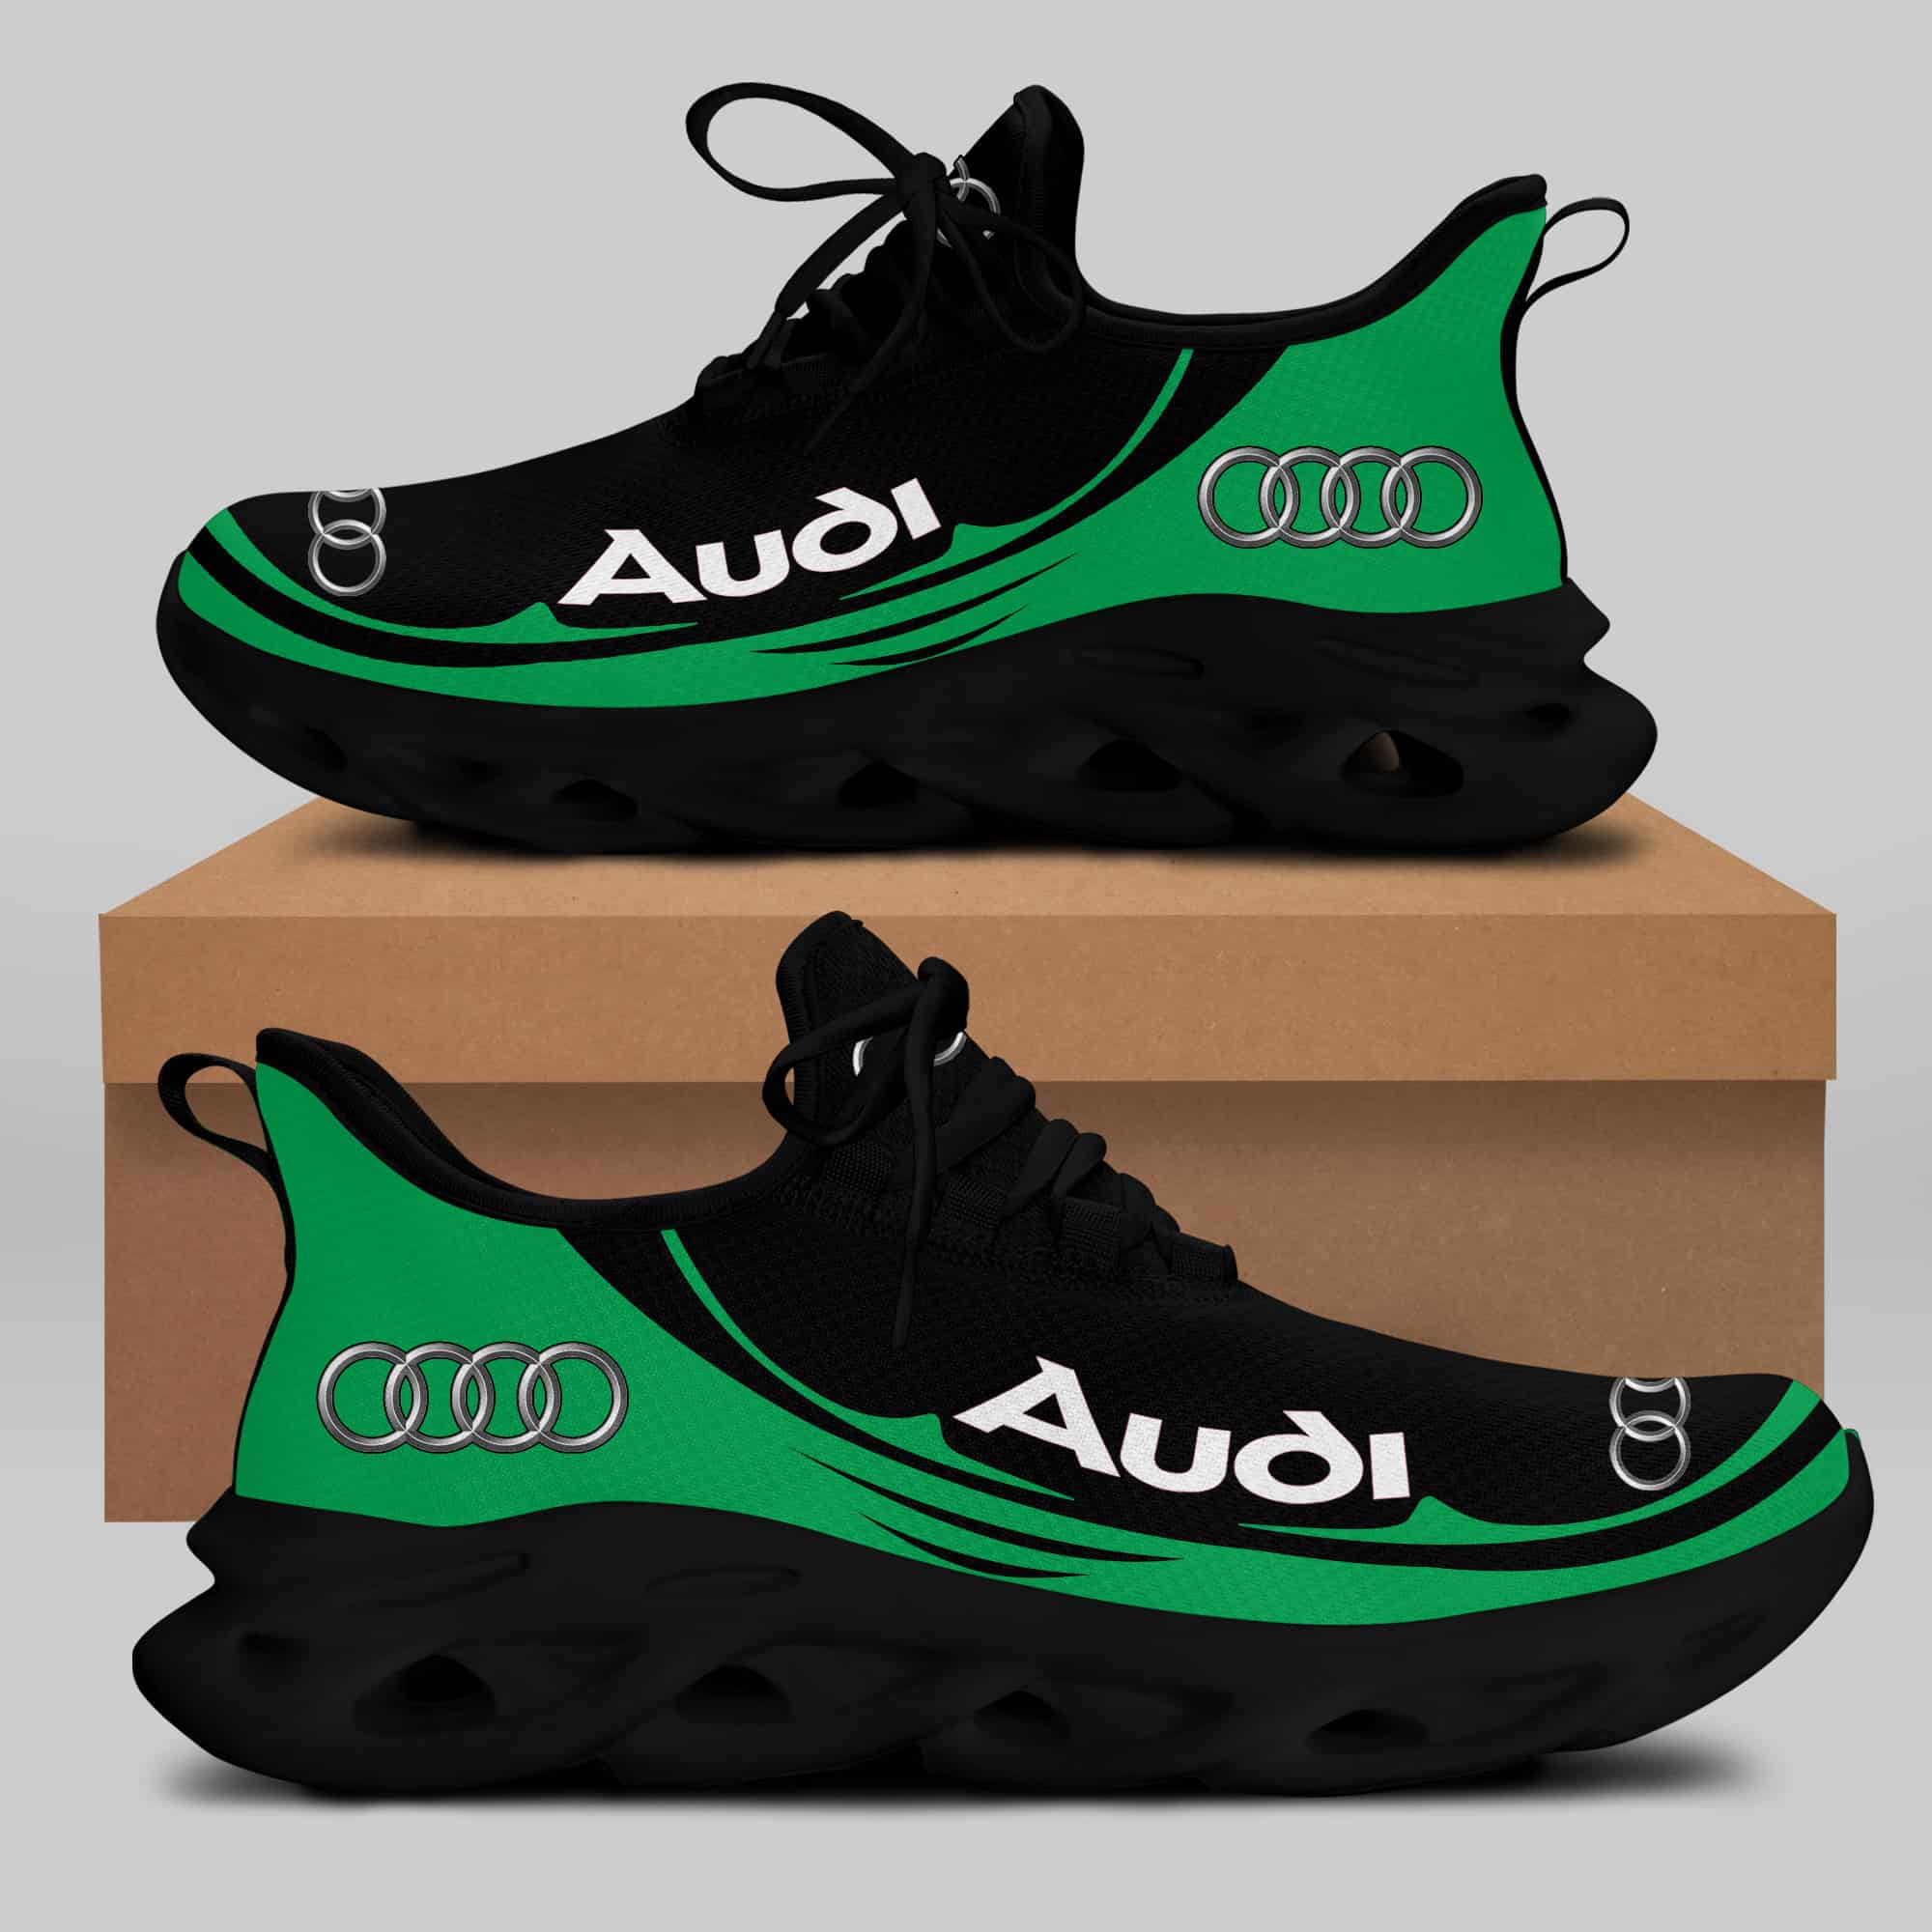 Audi Sport Running Shoes Max Soul Shoes Sneakers Ver 34 1